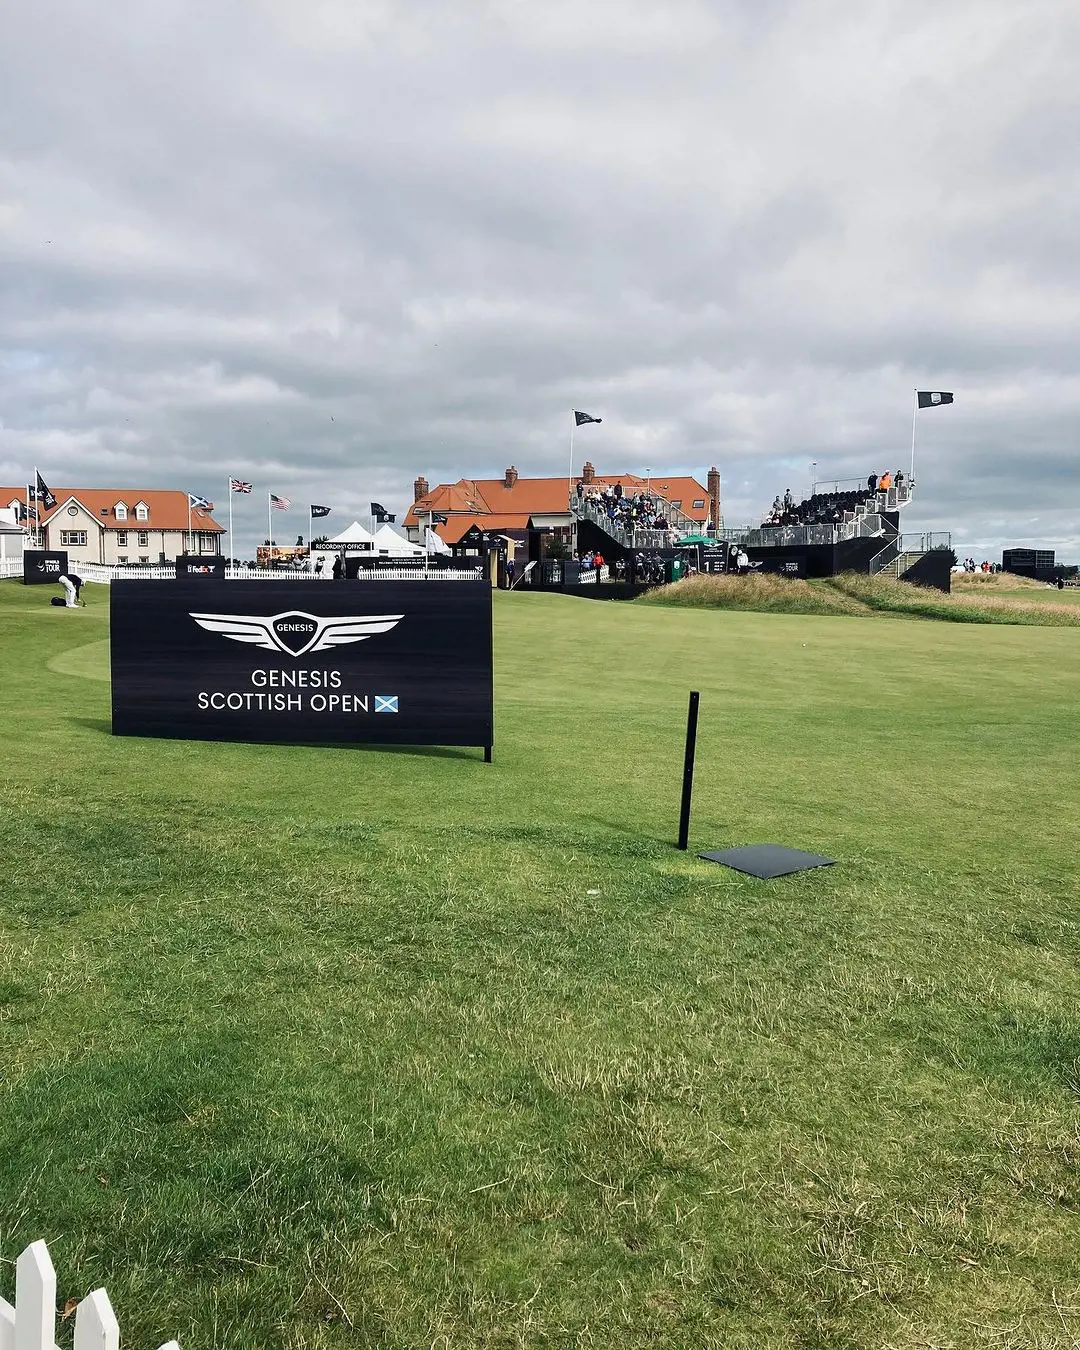 Genesis Scottish Open starts from July 13, 2023 at the Renaissance Club